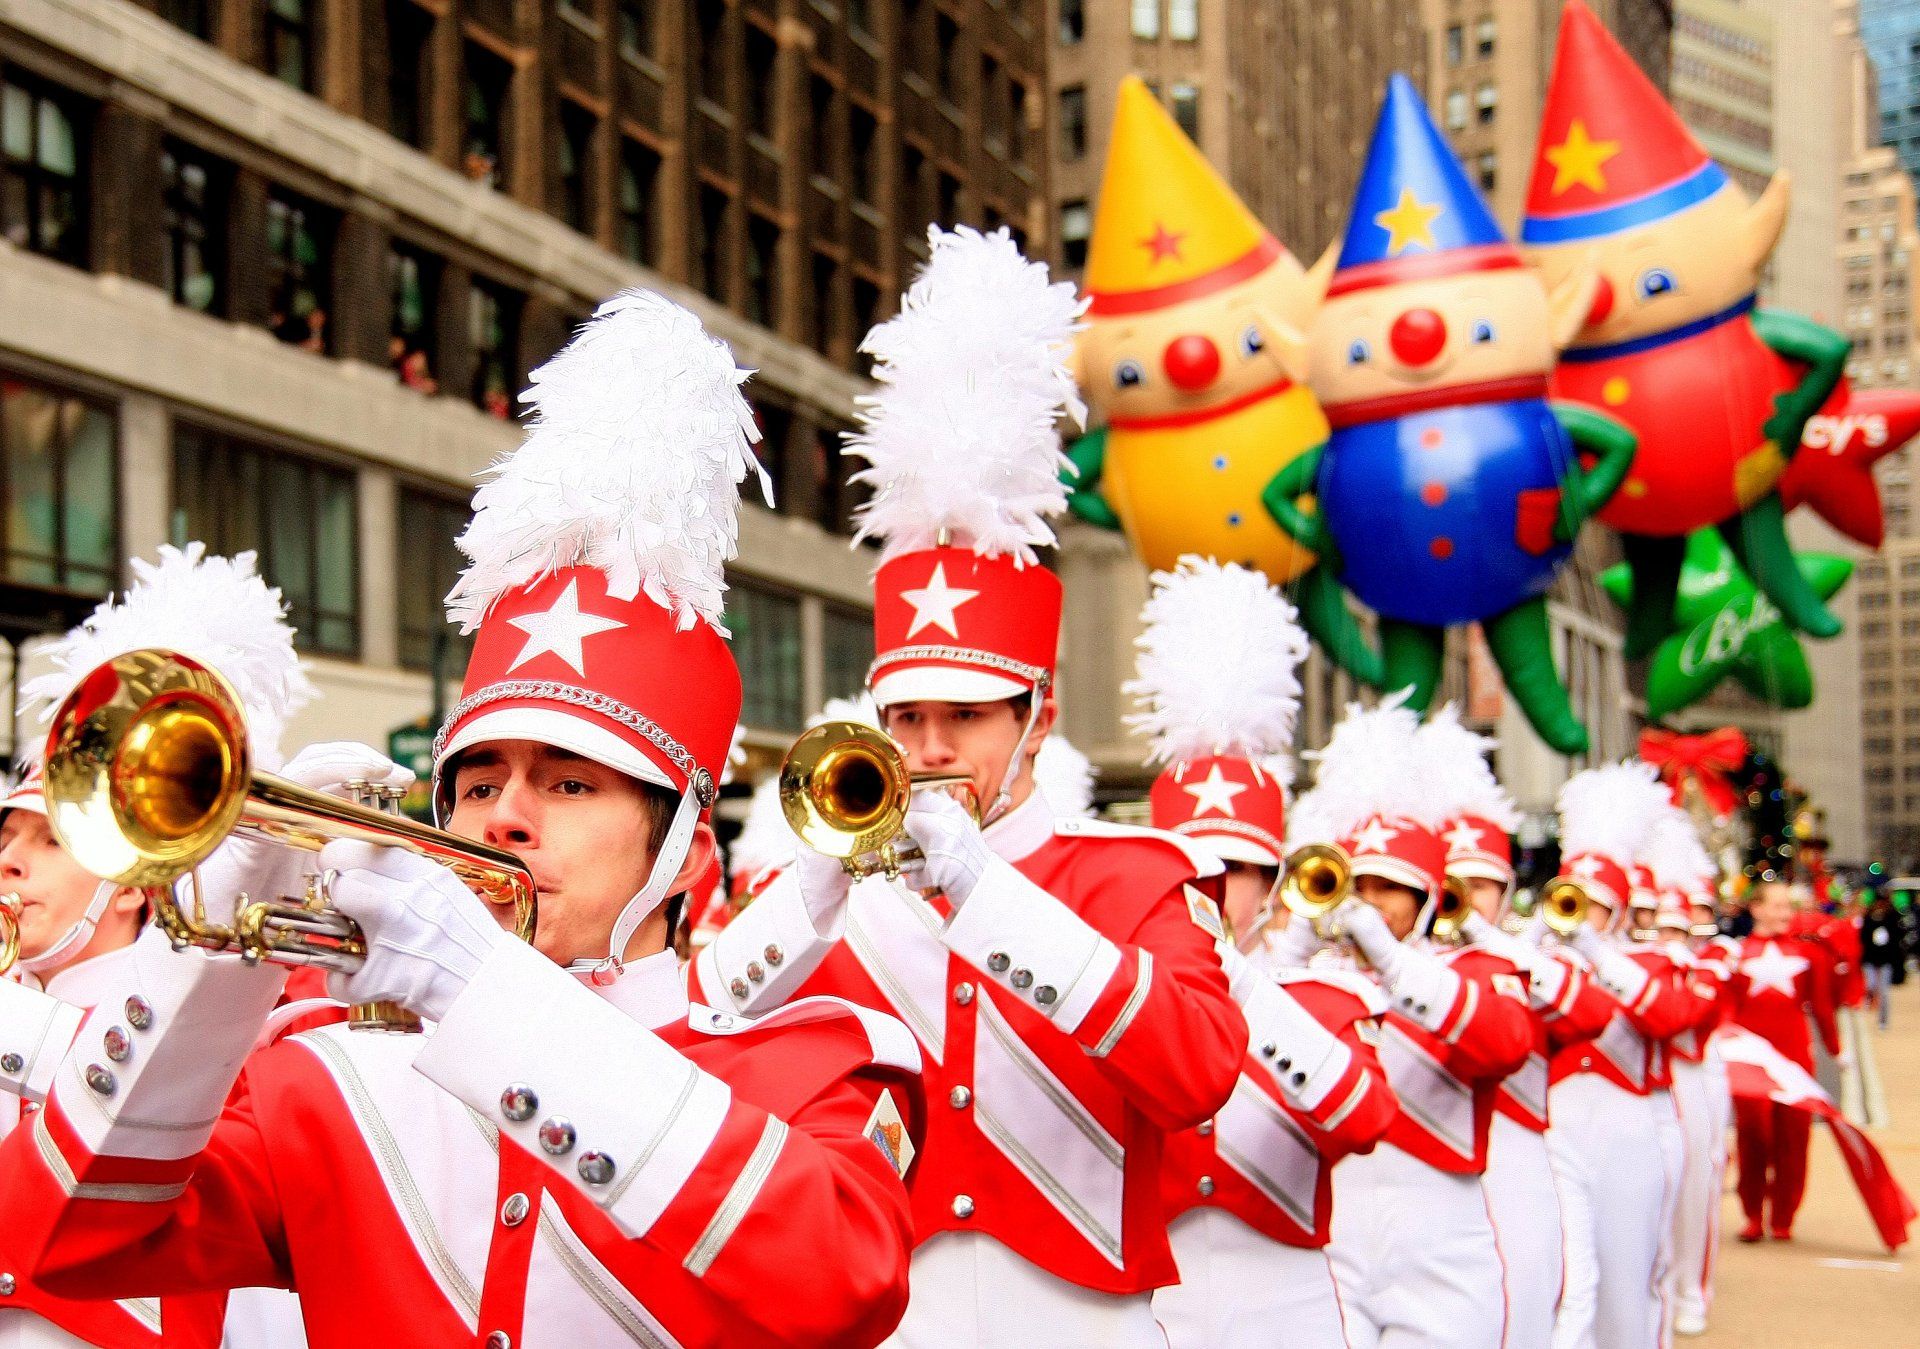 Largest Thanksgiving Day Parade: Macy's Thanksgiving Day Parade sets world record